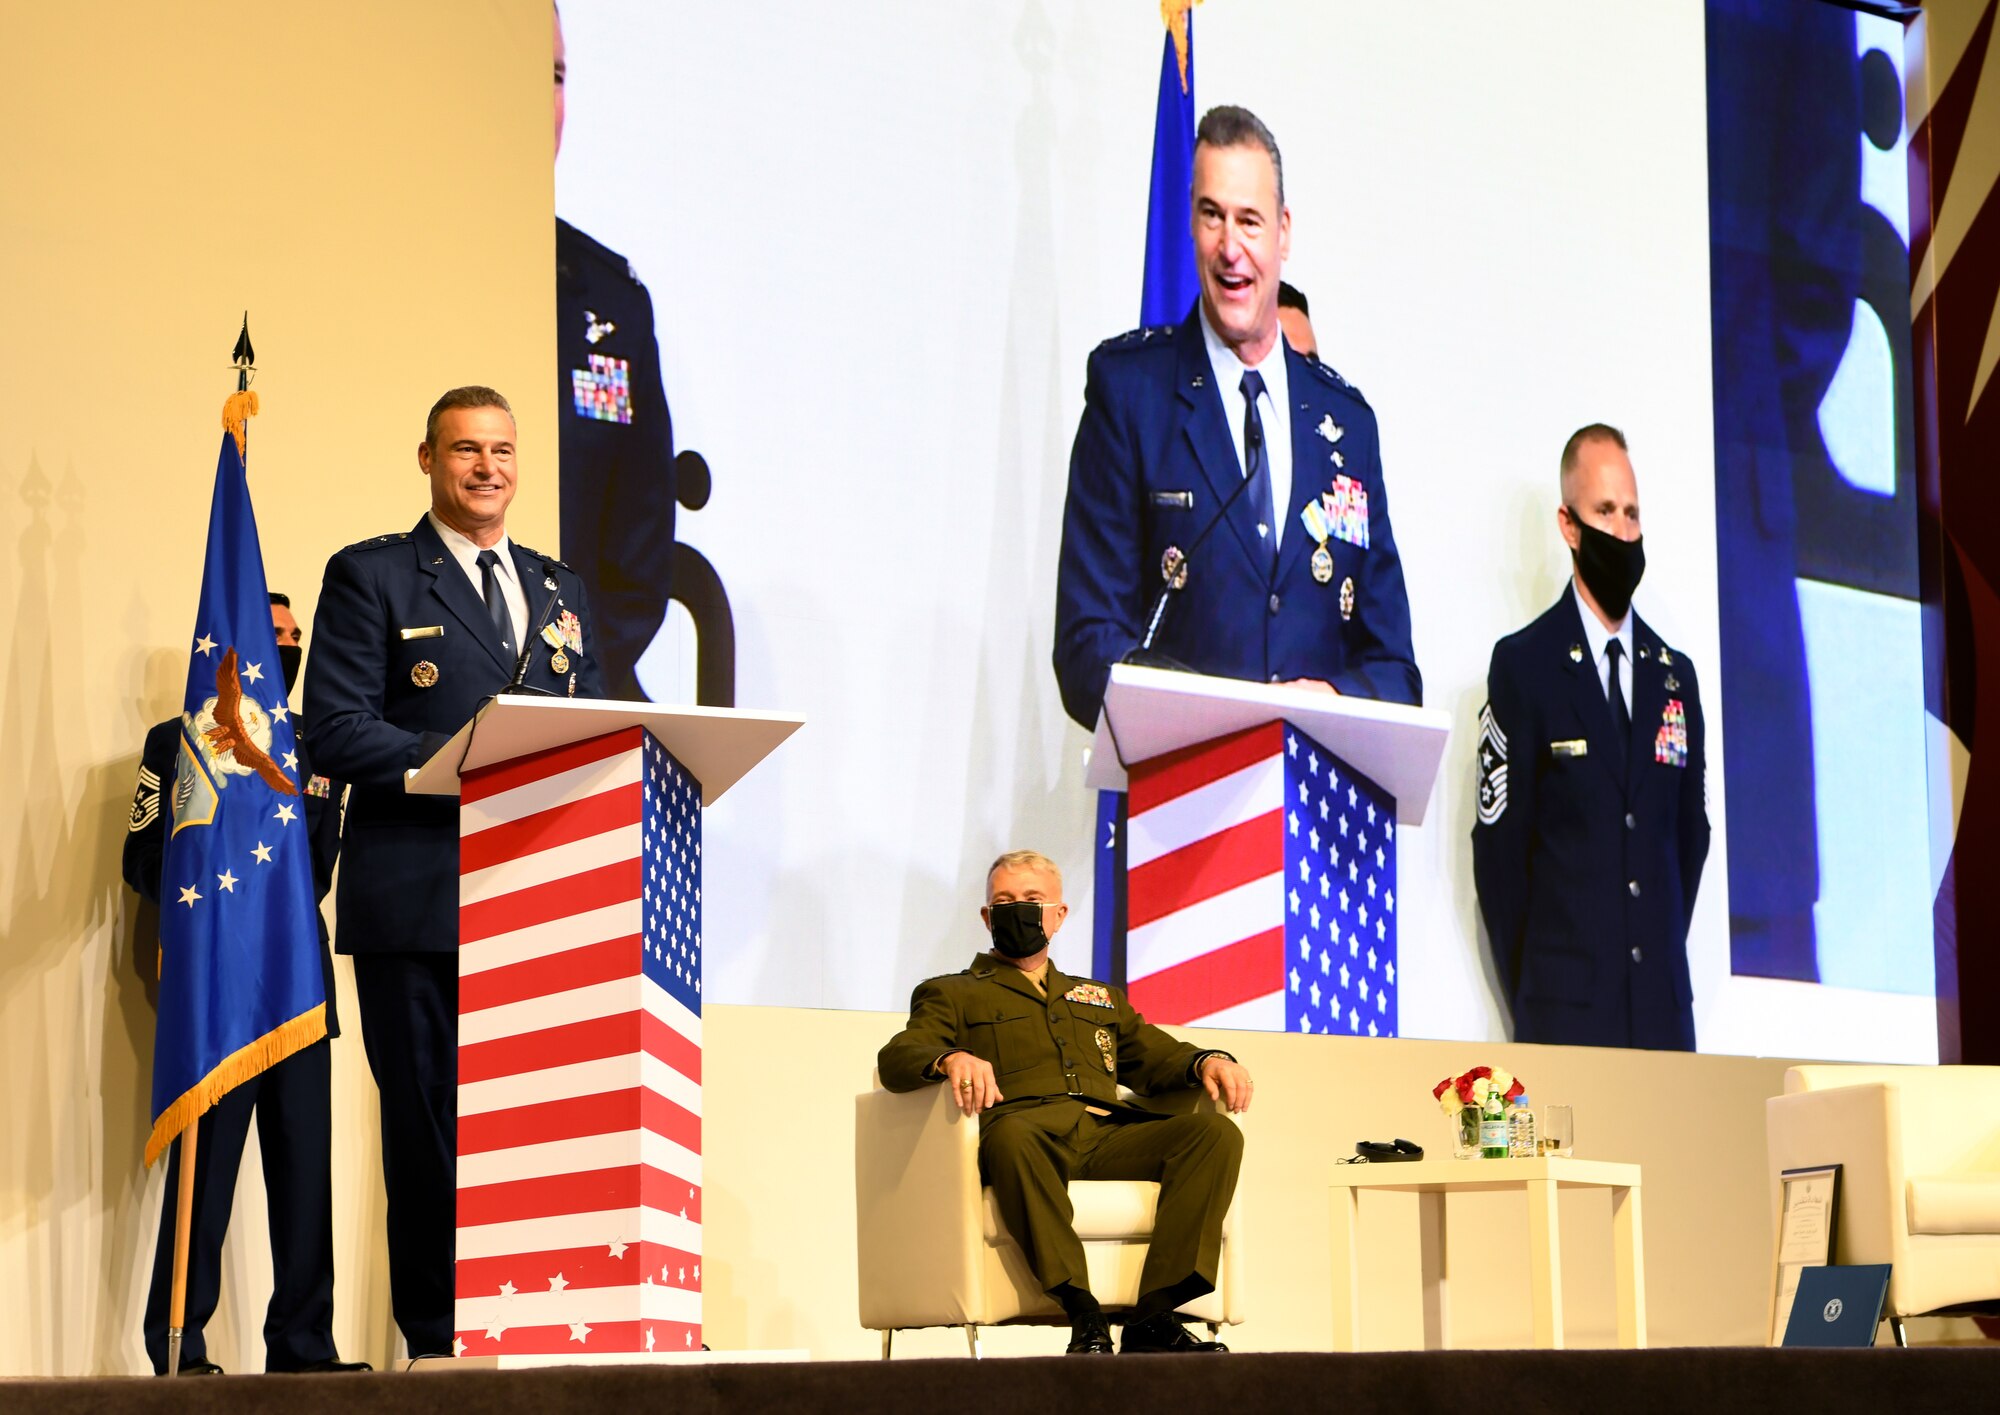 U.S. Air Force Lt. Gen. Joseph Guastella, outgoing commander of U.S. Air Forces Central Command, makes remarks before officially relinquishing command to U.S. Air Force Lt. Gen. Gregory Guillot during a change of command ceremony at Al Udeid Air Base, Qatar, July 16, 2020.